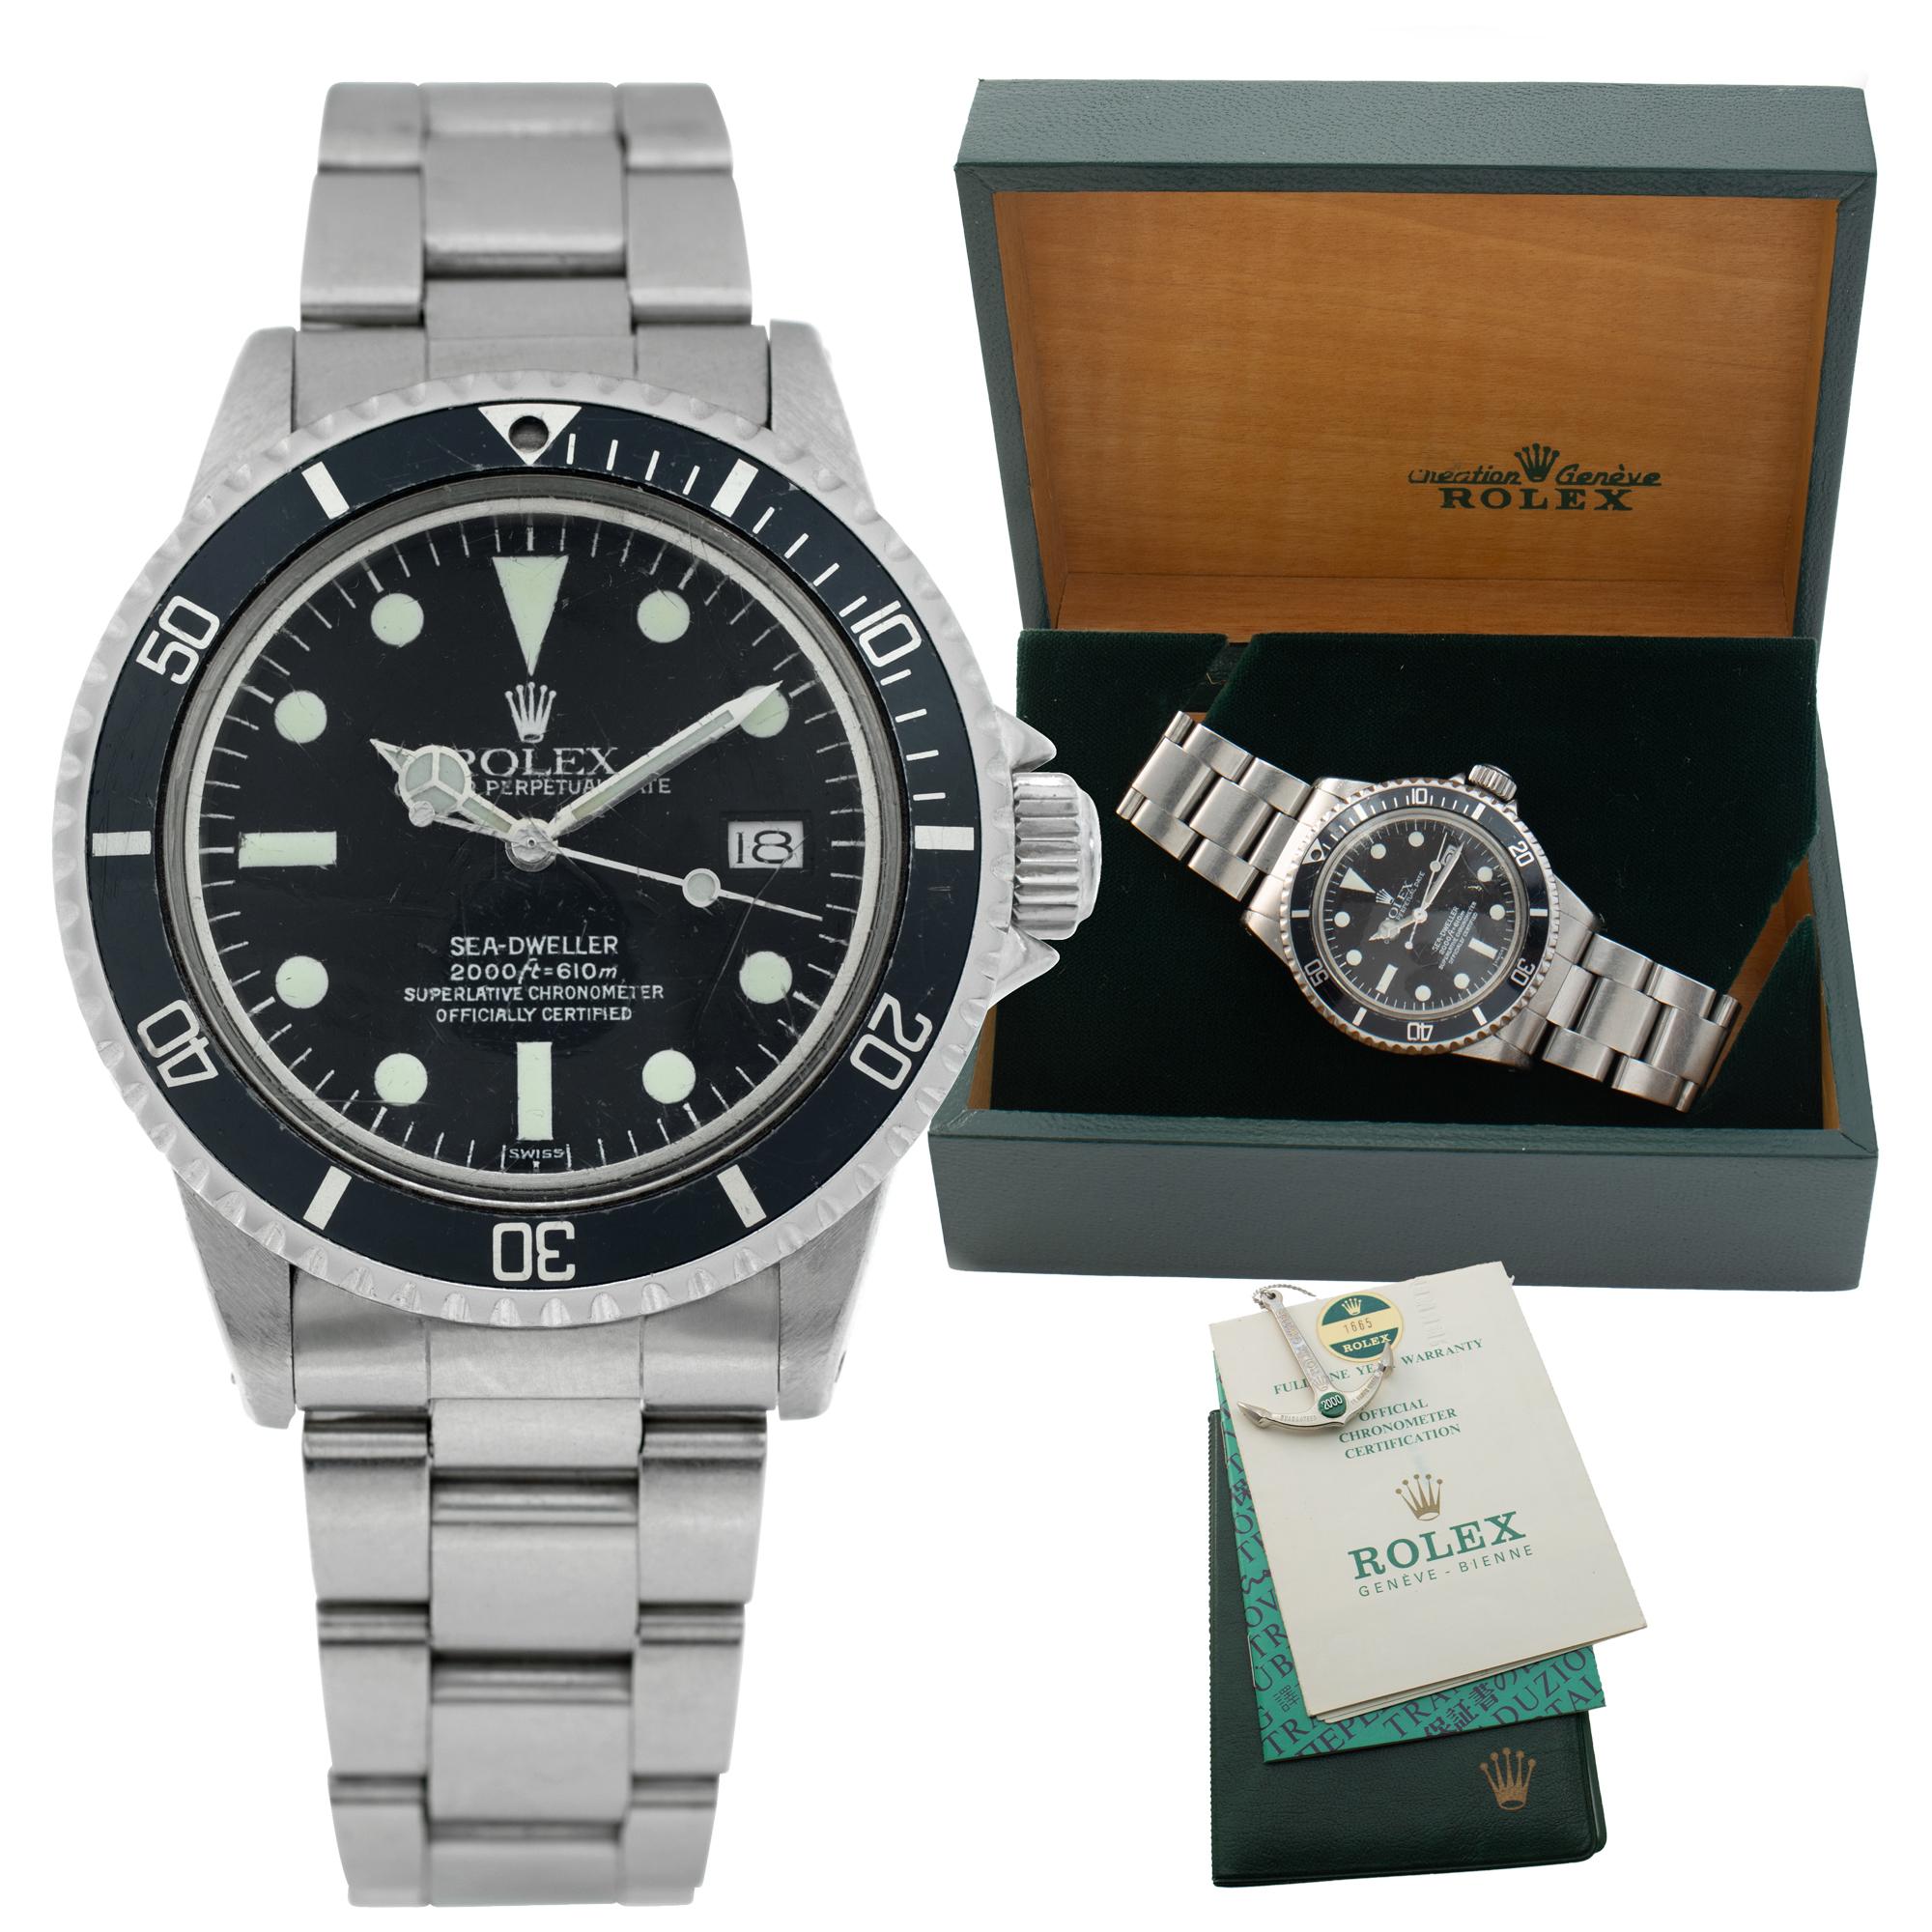 Rolex Sea-Dweller stainless steel Automatic Wristwatch Ref 1665 For Sale 4